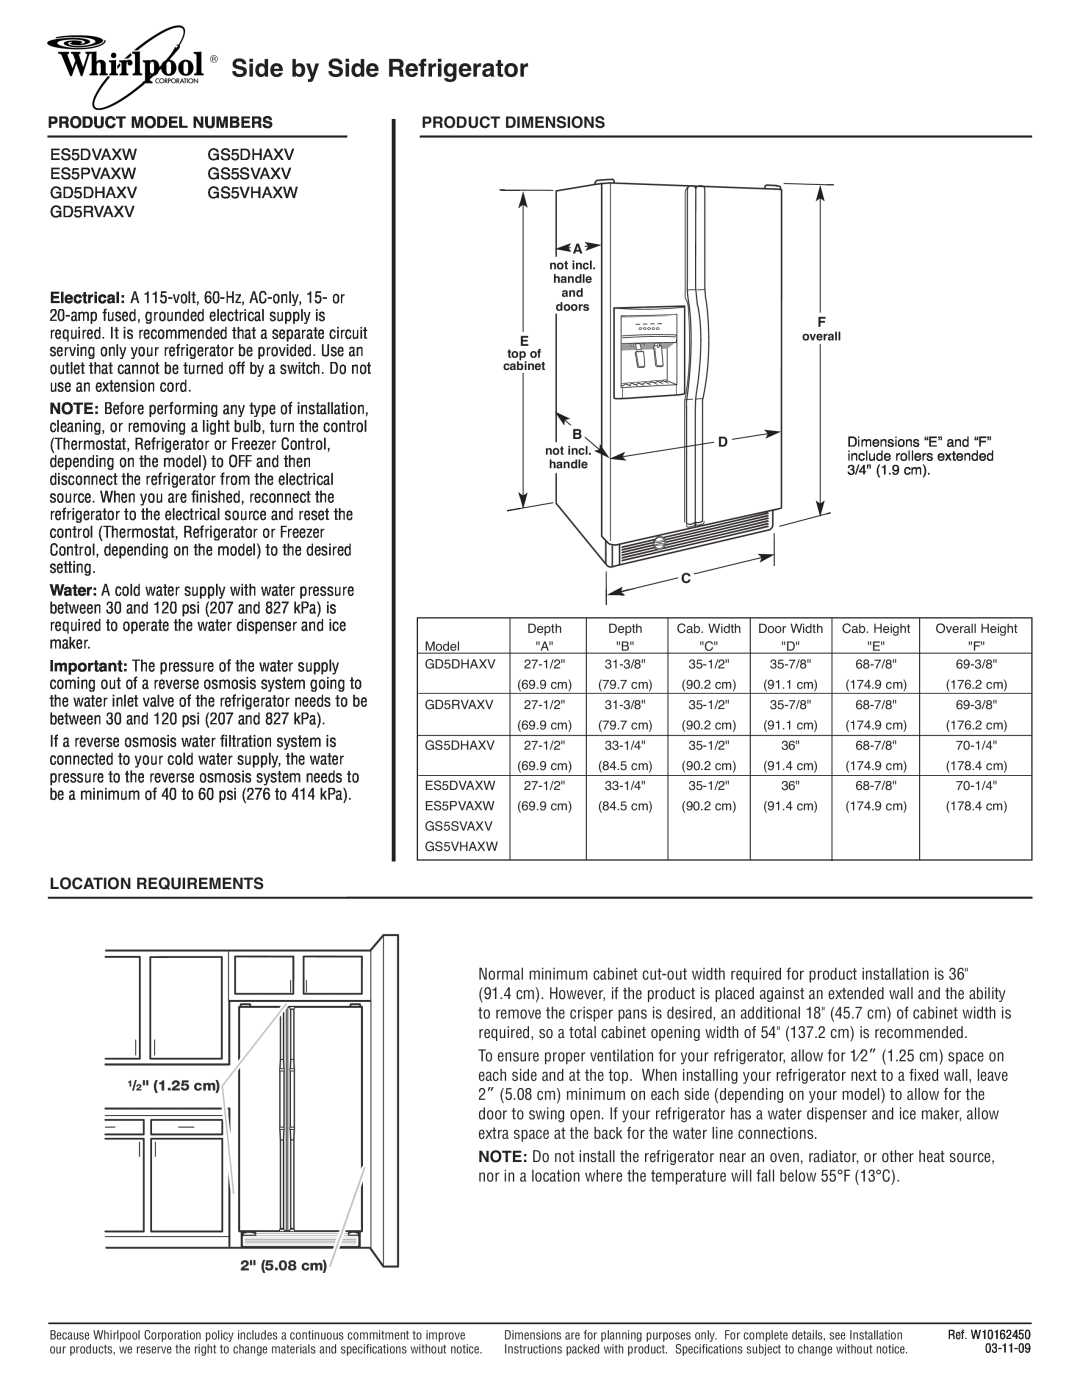 Whirlpool ES5DVAXW dimensions Side by Side Refrigerator, Product Model Numbers, Product Dimensions, Location Requirements 